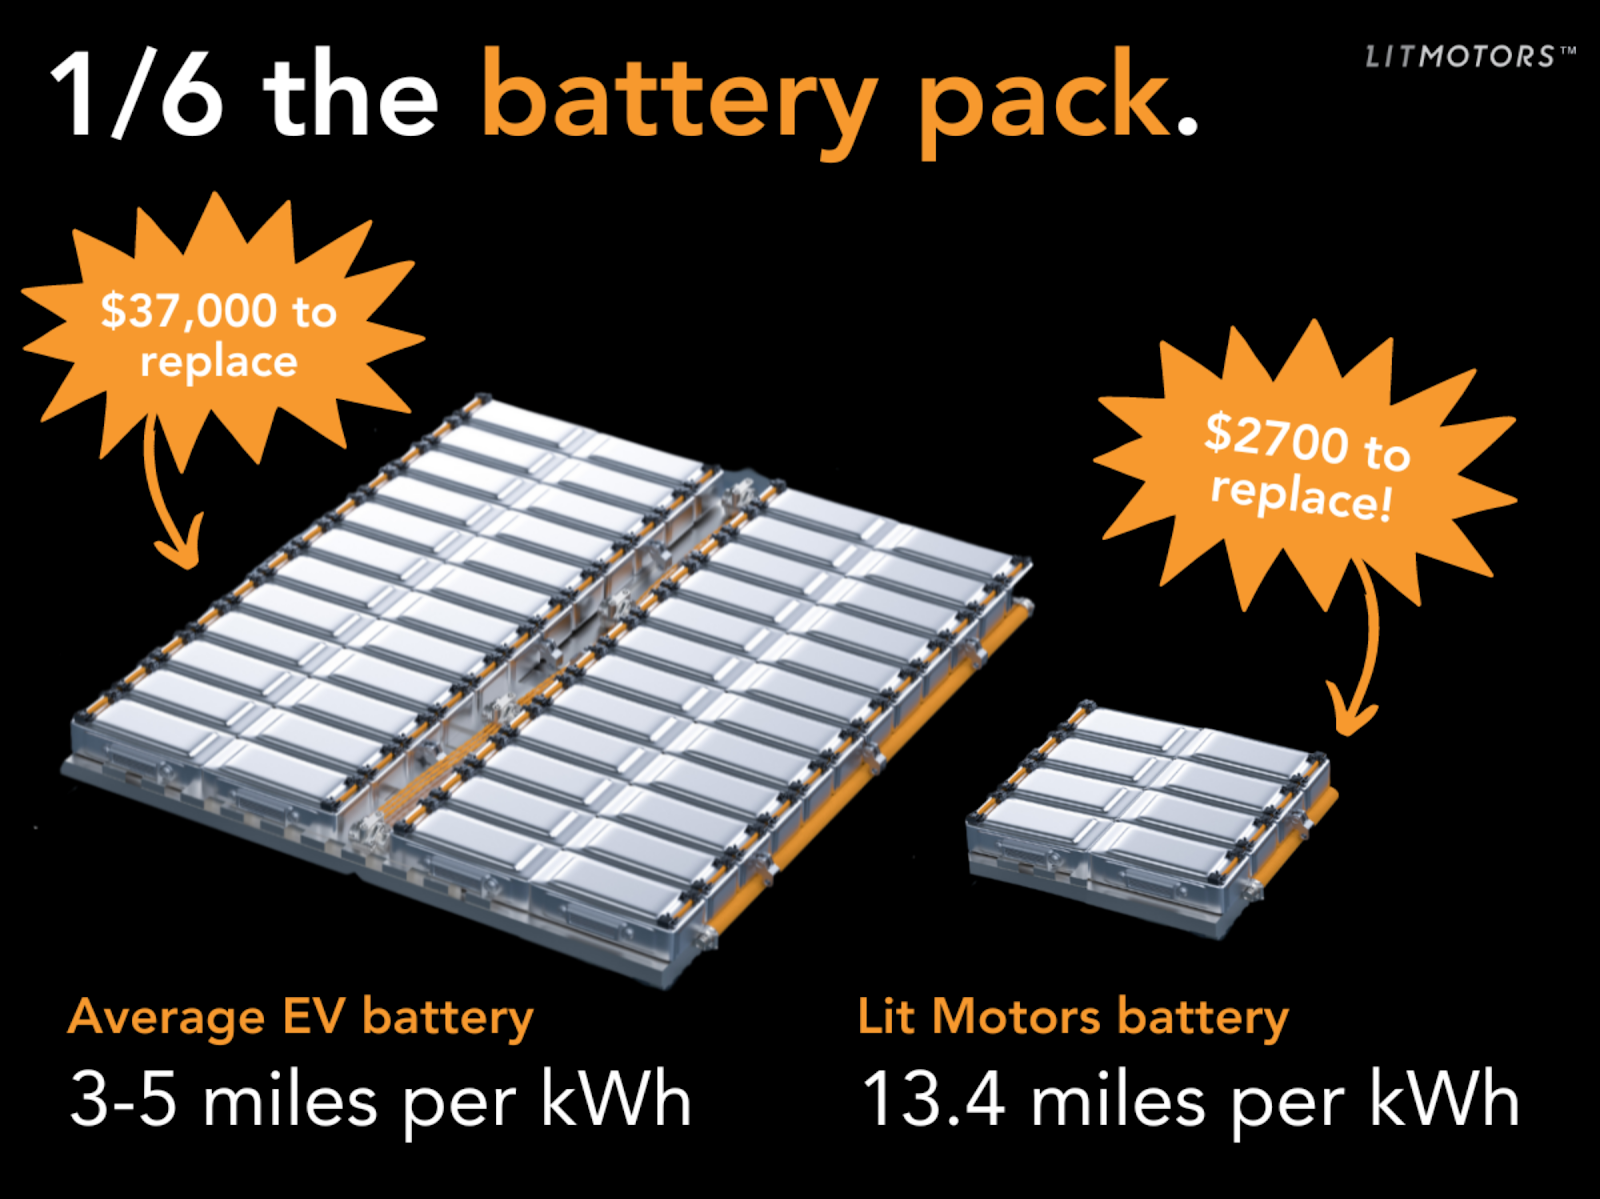 1/6 the battery pack: $37k to replace average EV battery, $2700 to replace Lit Motors battery